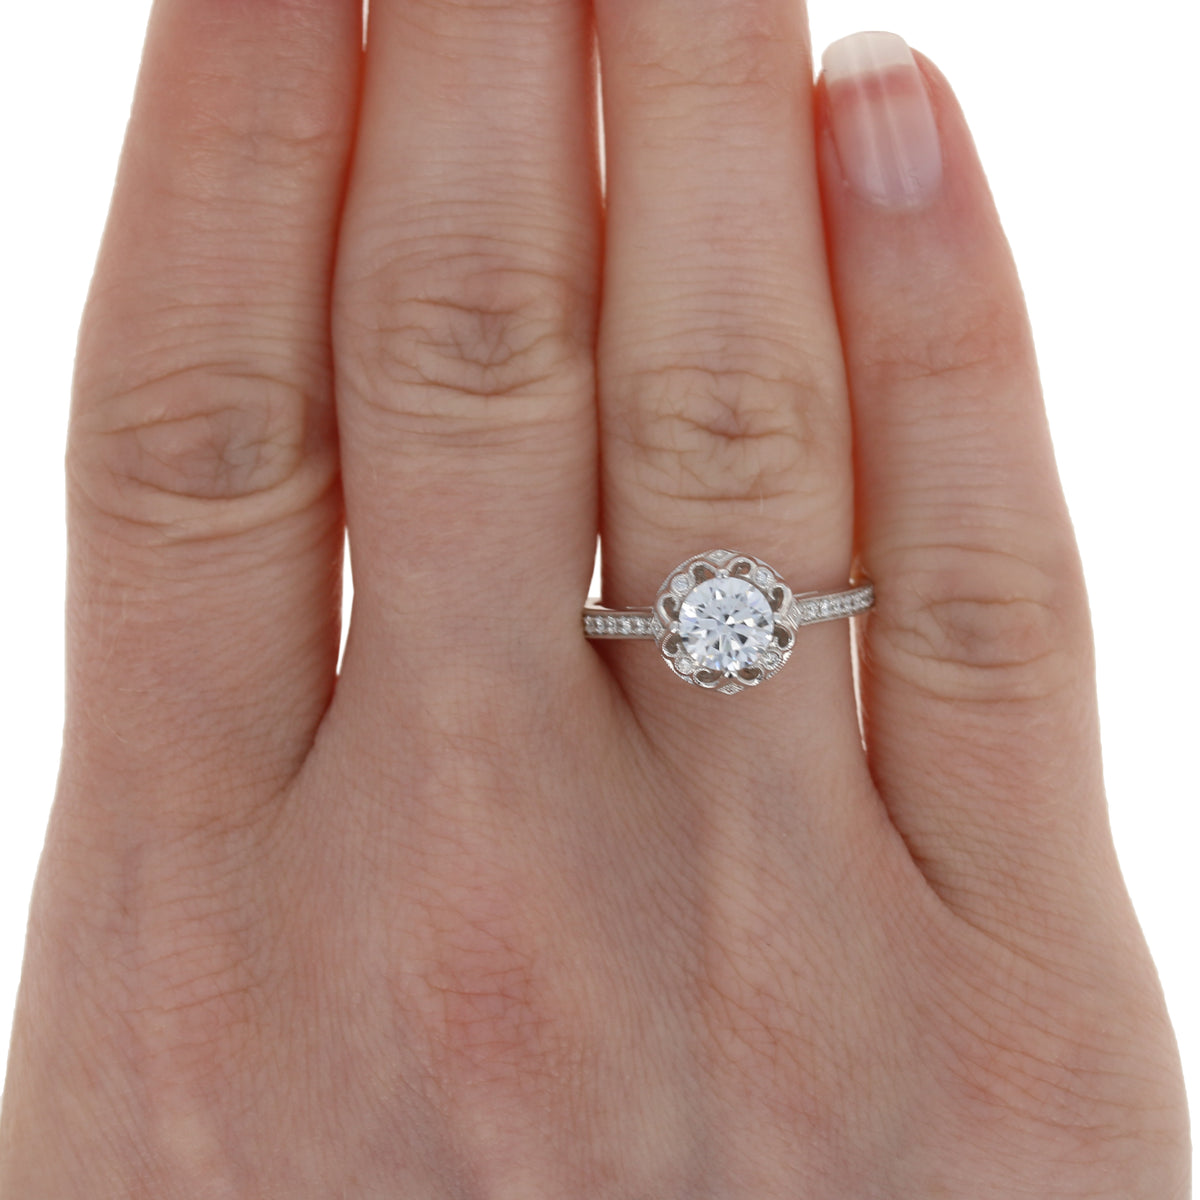 Beverly K 0.19 Cubic Zirconia (semi-mount placeholder) Ring White Gold